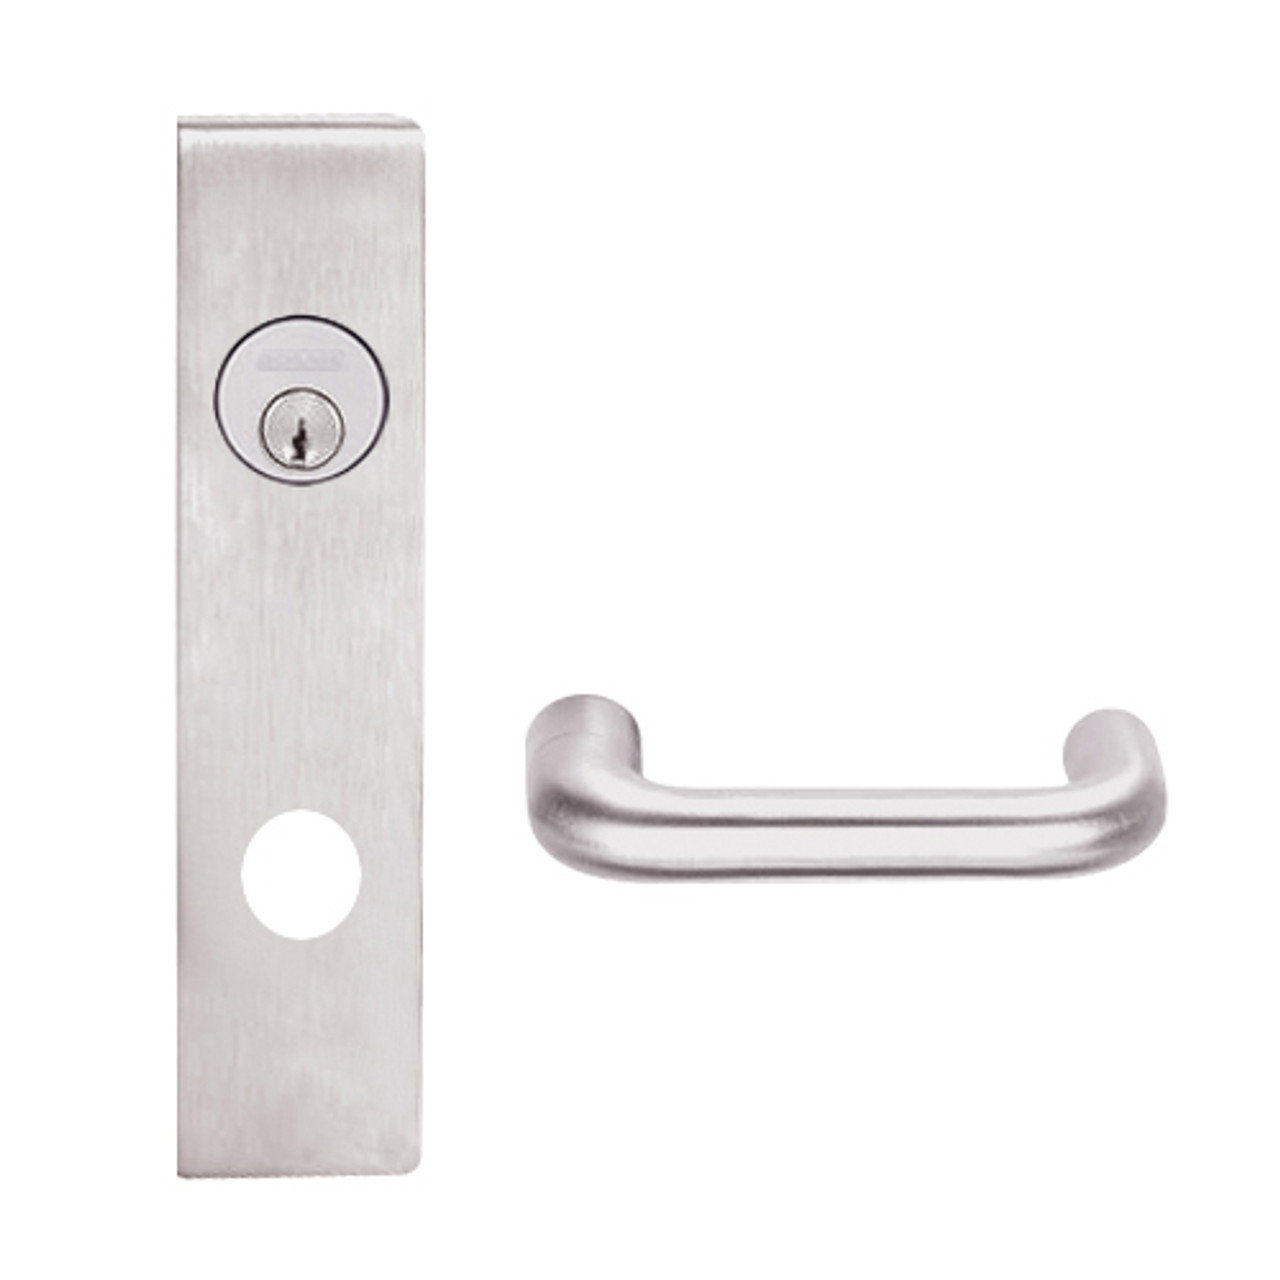 L9453P-03L-629 Schlage L Series Entrance with Deadbolt Commercial Mortise Lock with 03 Cast Lever Design in Bright Stainless Steel